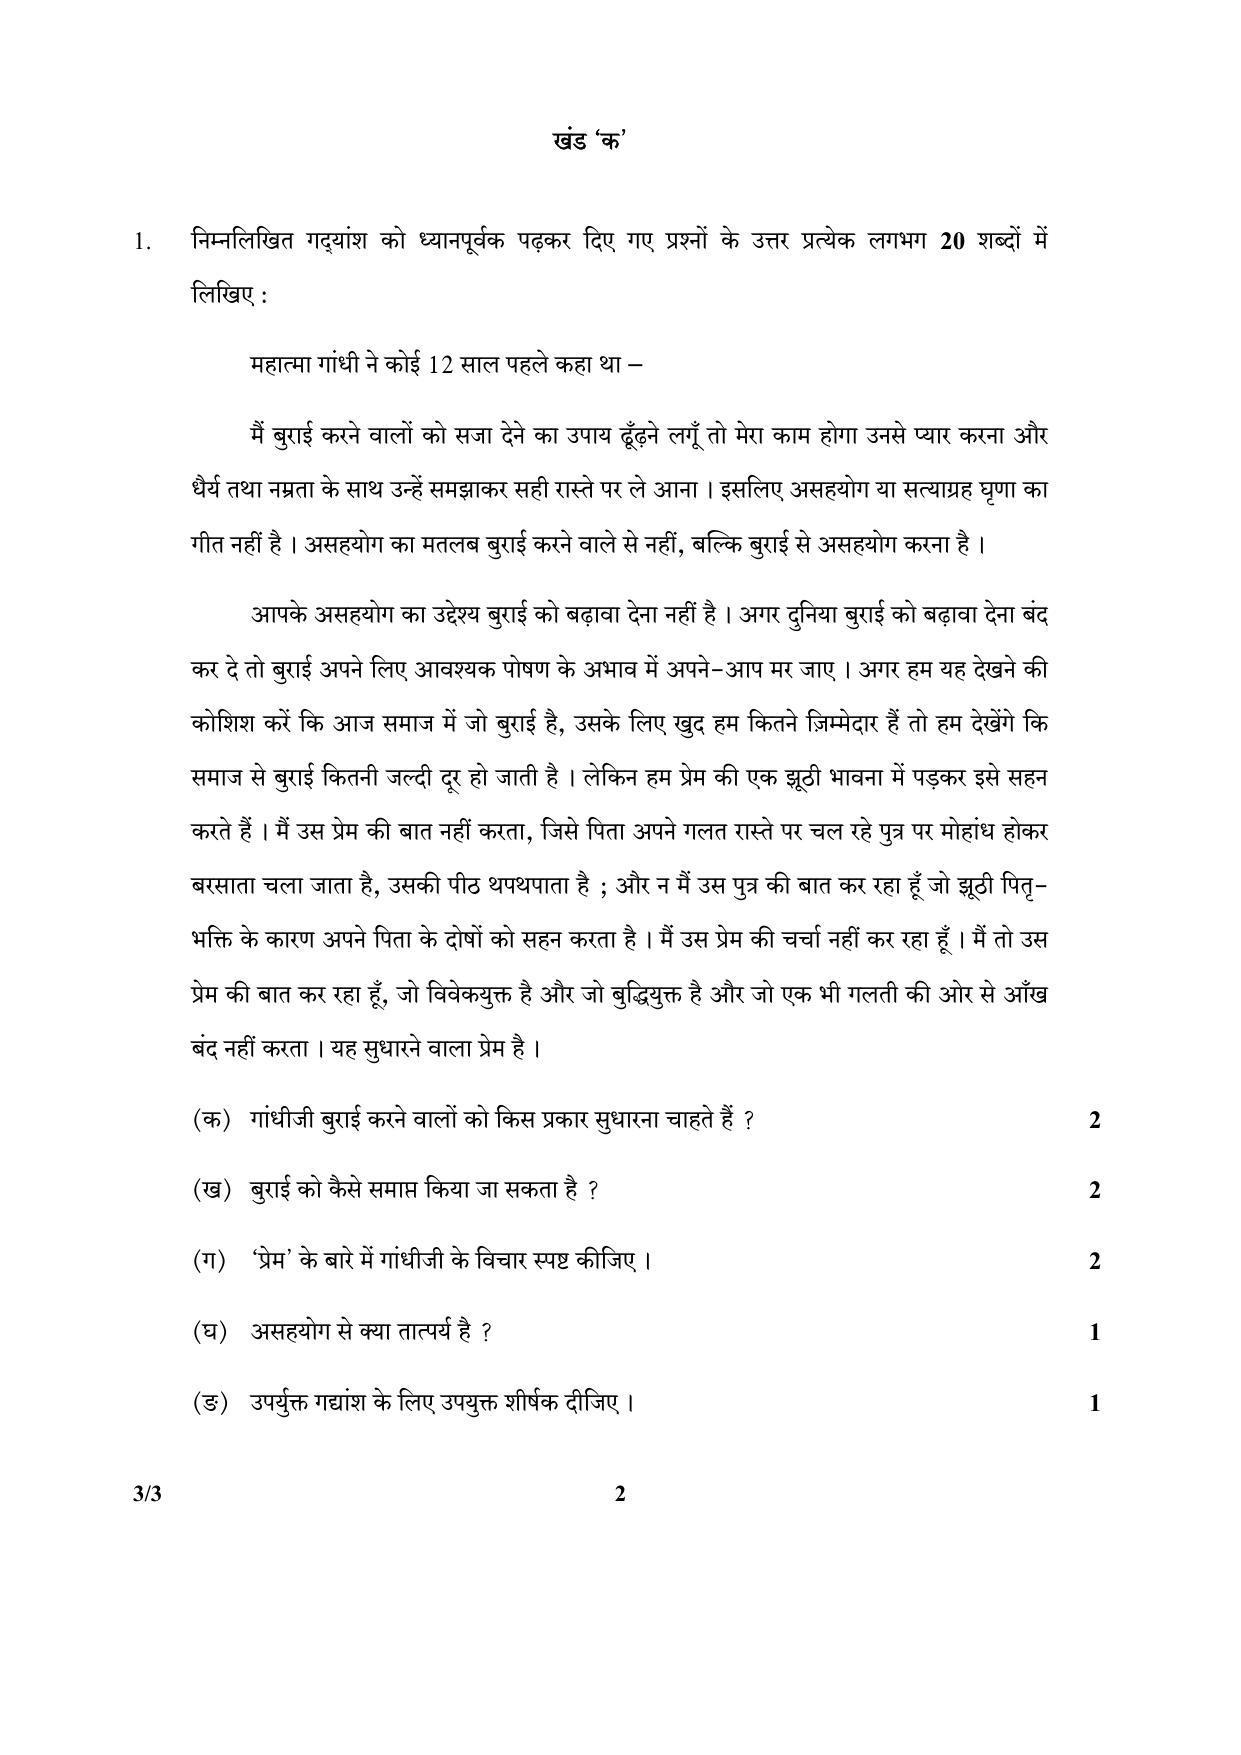 CBSE Class 10 3-3_Hindi SET-3 2018 Question Paper - Page 2